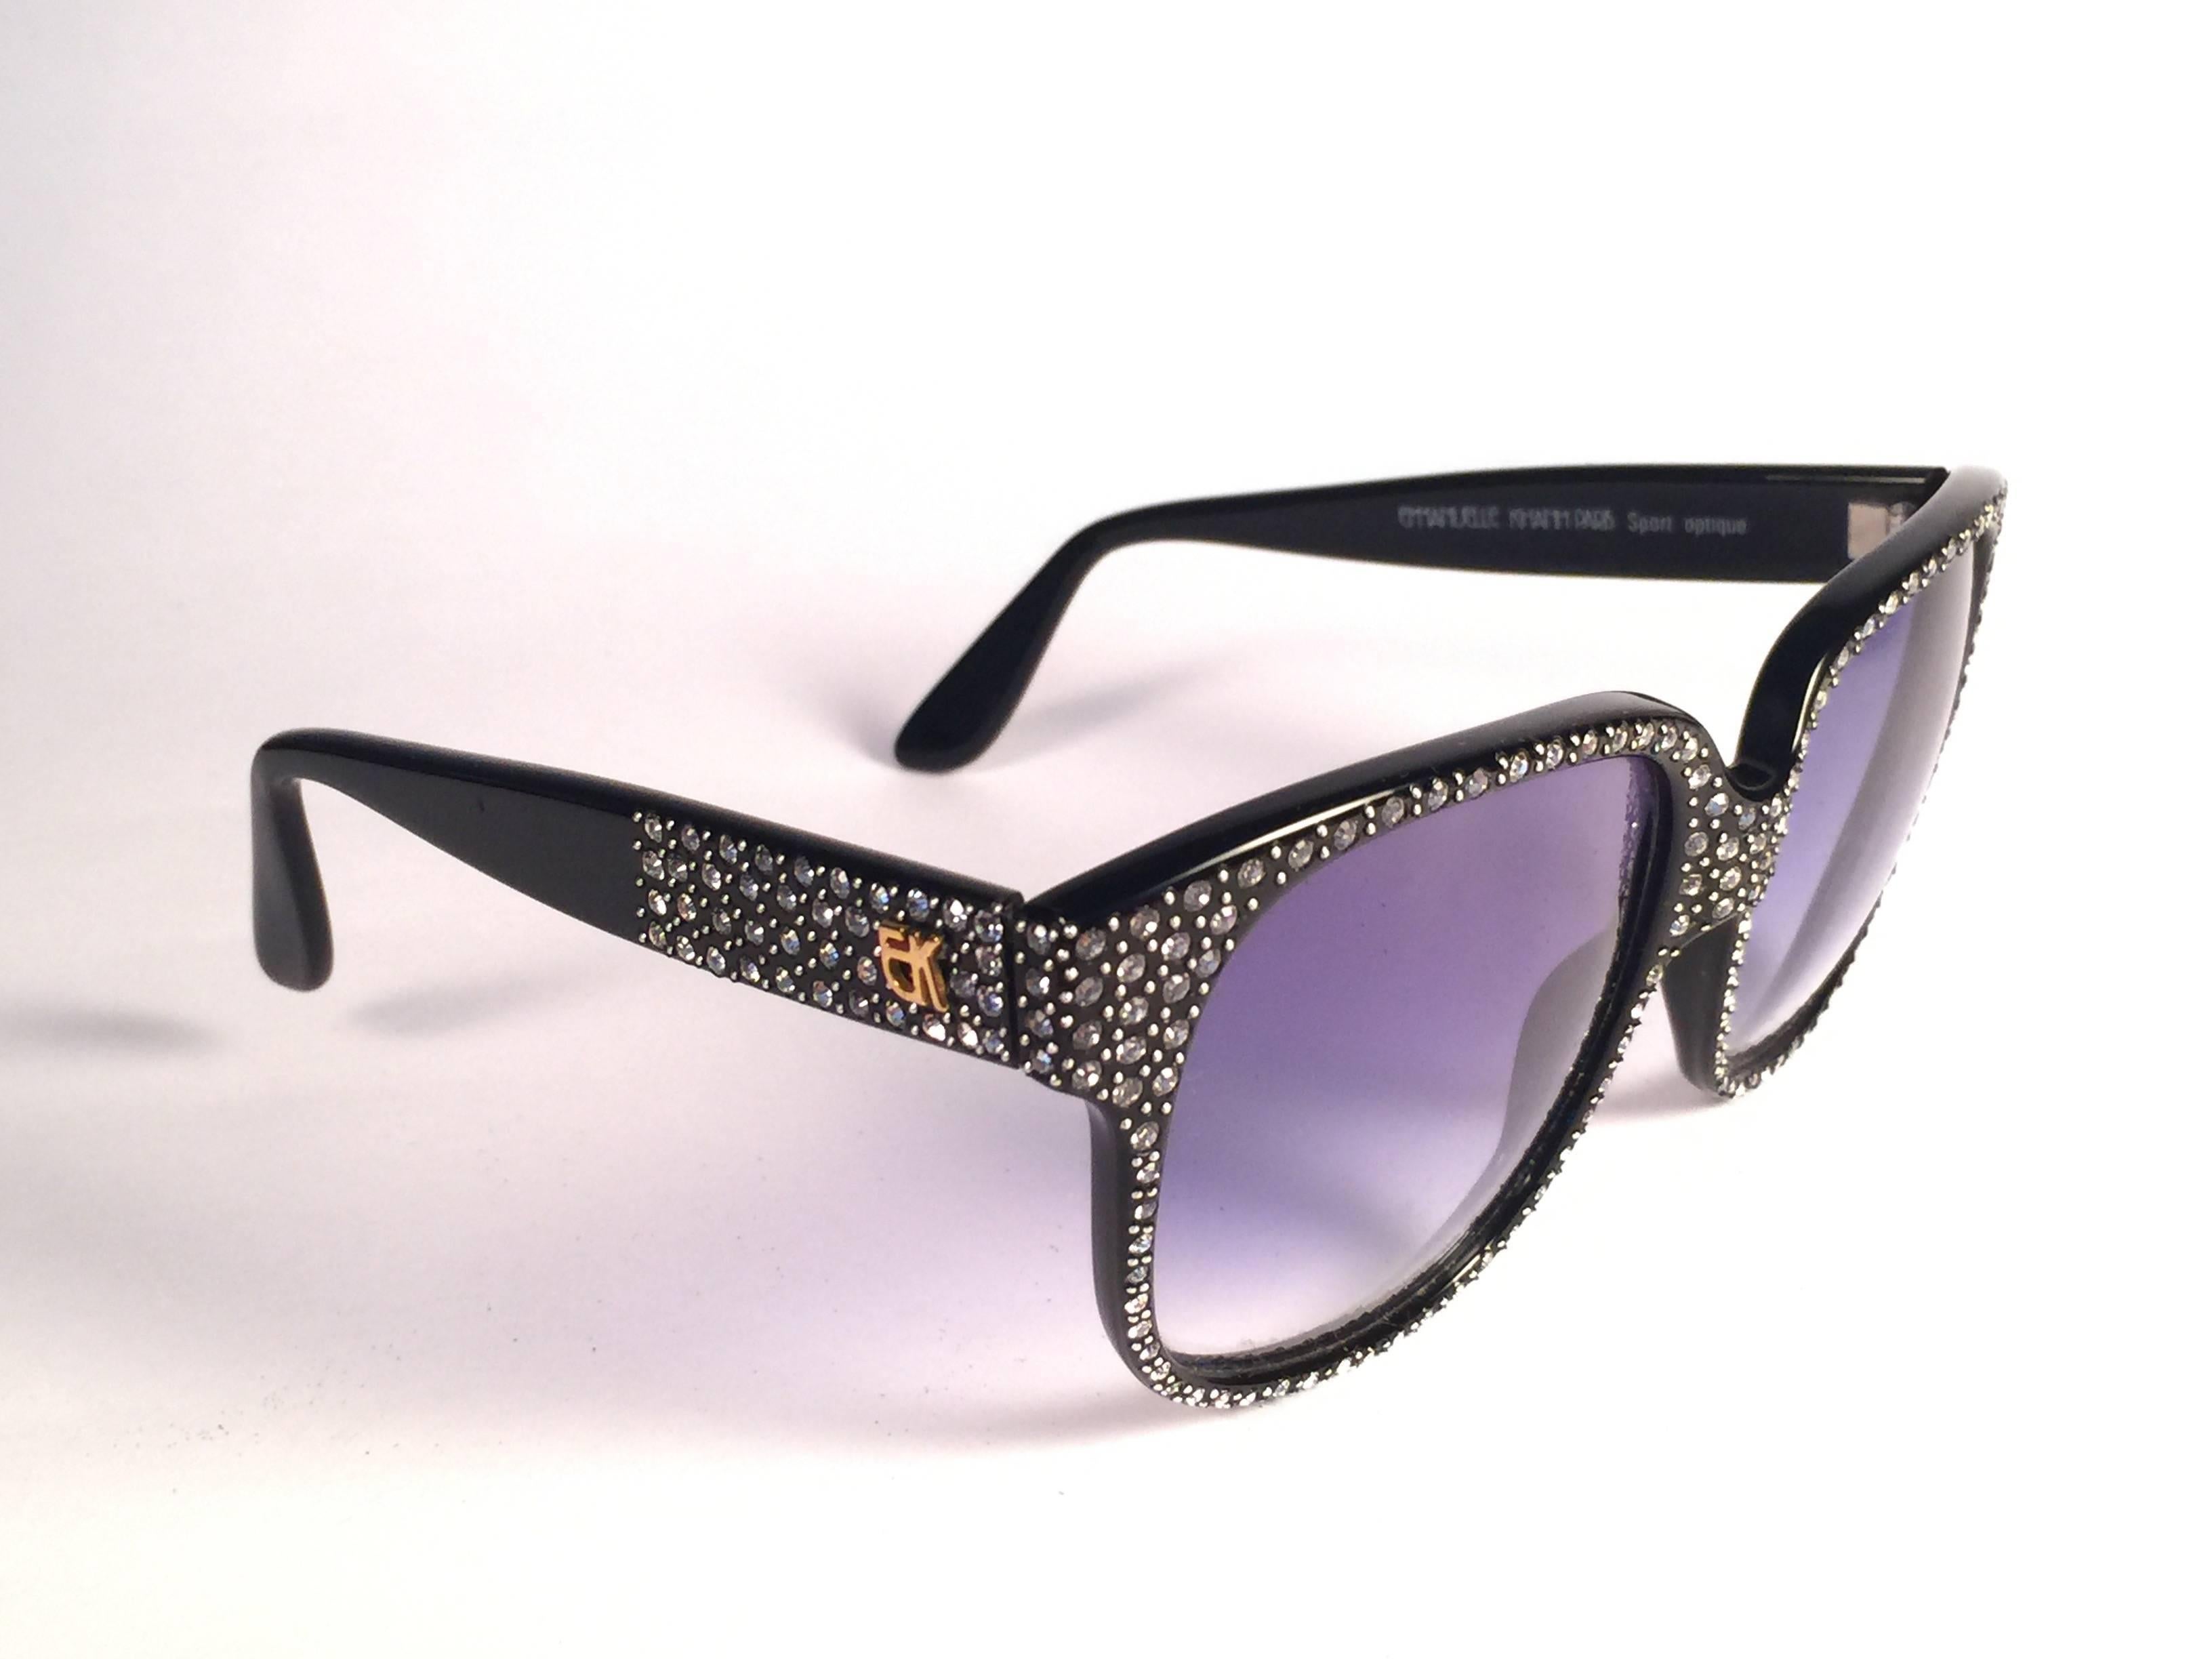 New Vintage Emanuelle Kahn rhinestones accents frame with spotless purple gradient lenses.  
Made in Paris. 
Produced and design in 1980's.  
New, never worn or displayed. Please consider this item is nearly 40 years old and could show minor sign of